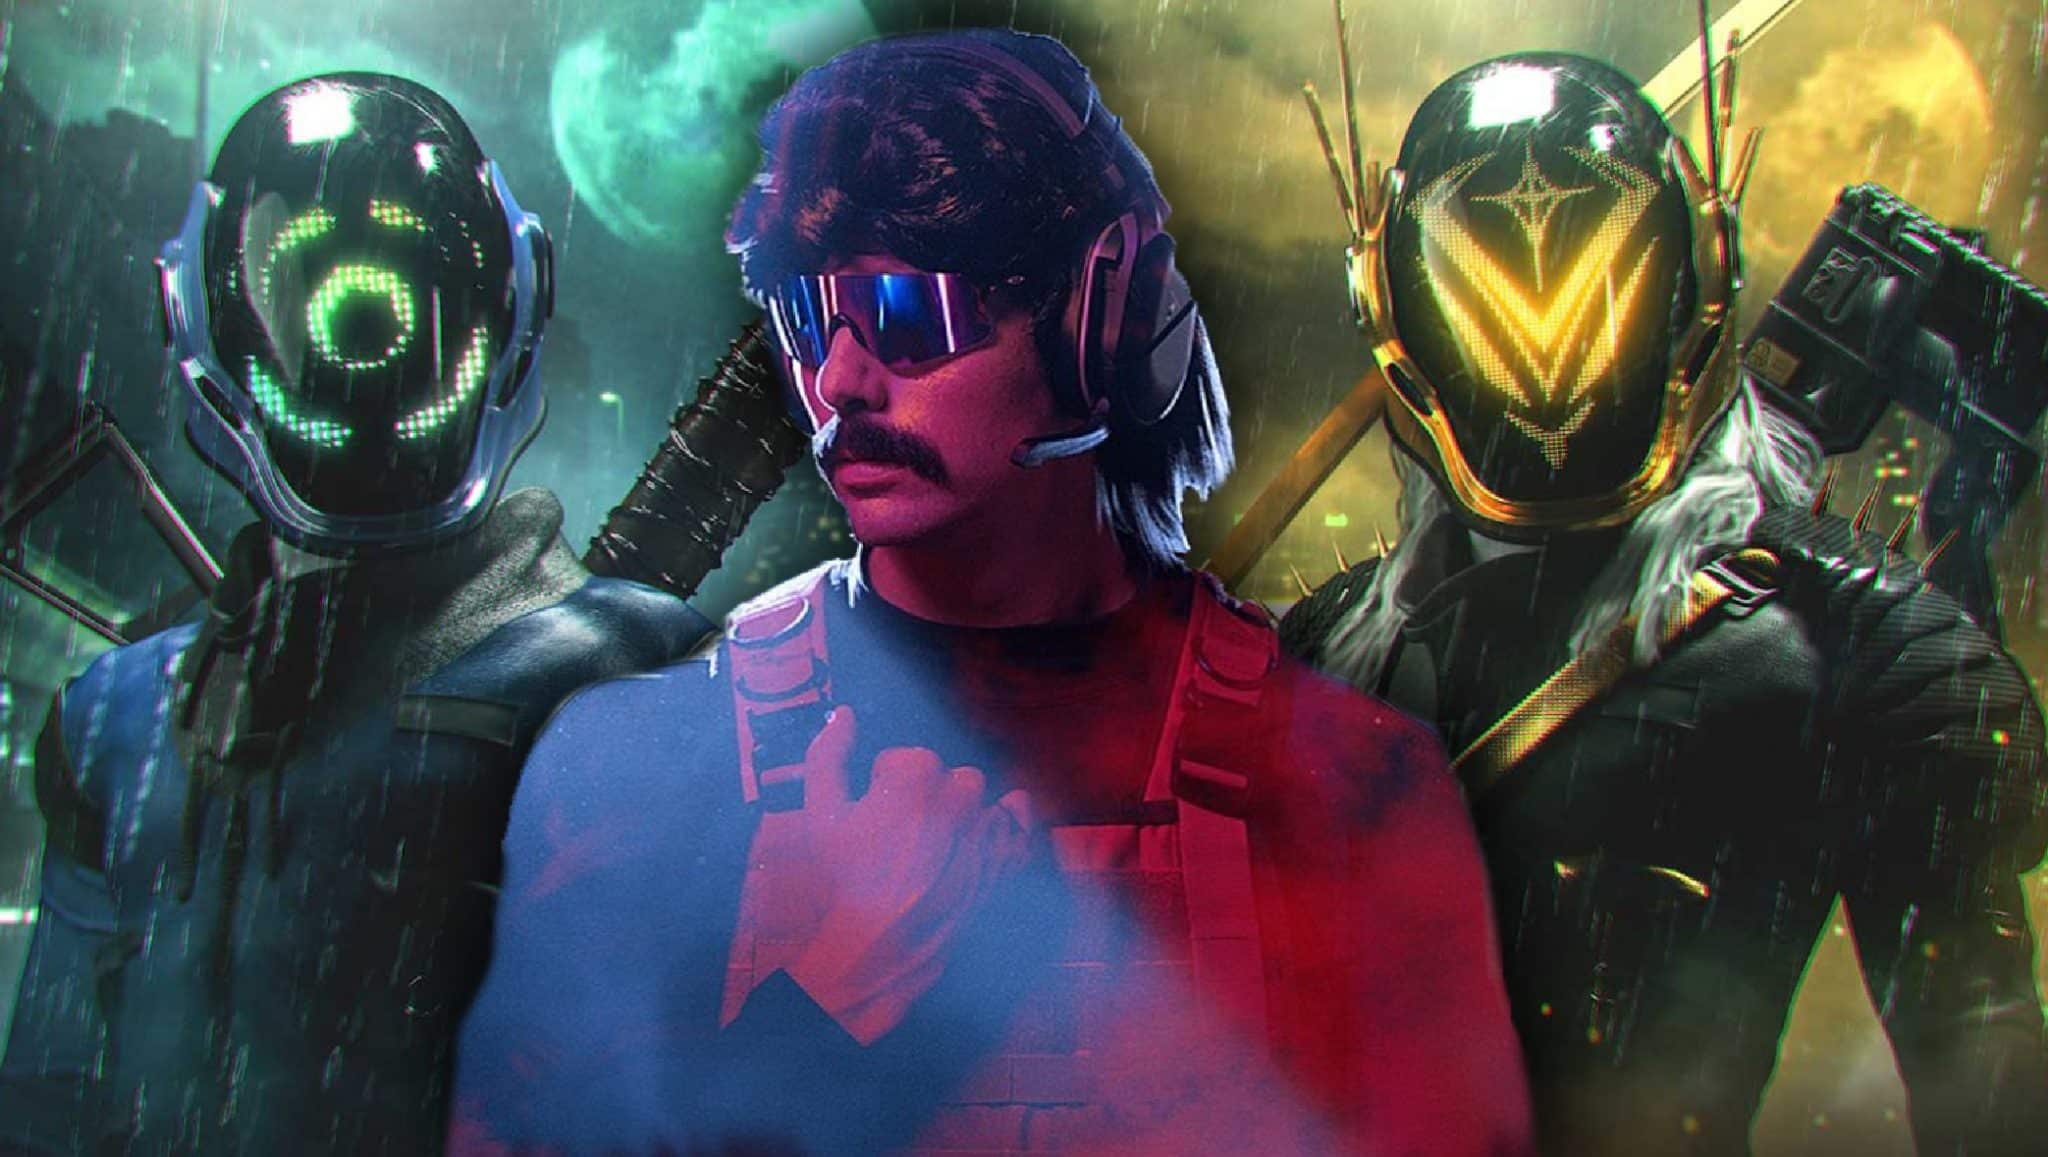 Dr Disrespect in front of Midnight Society artwork